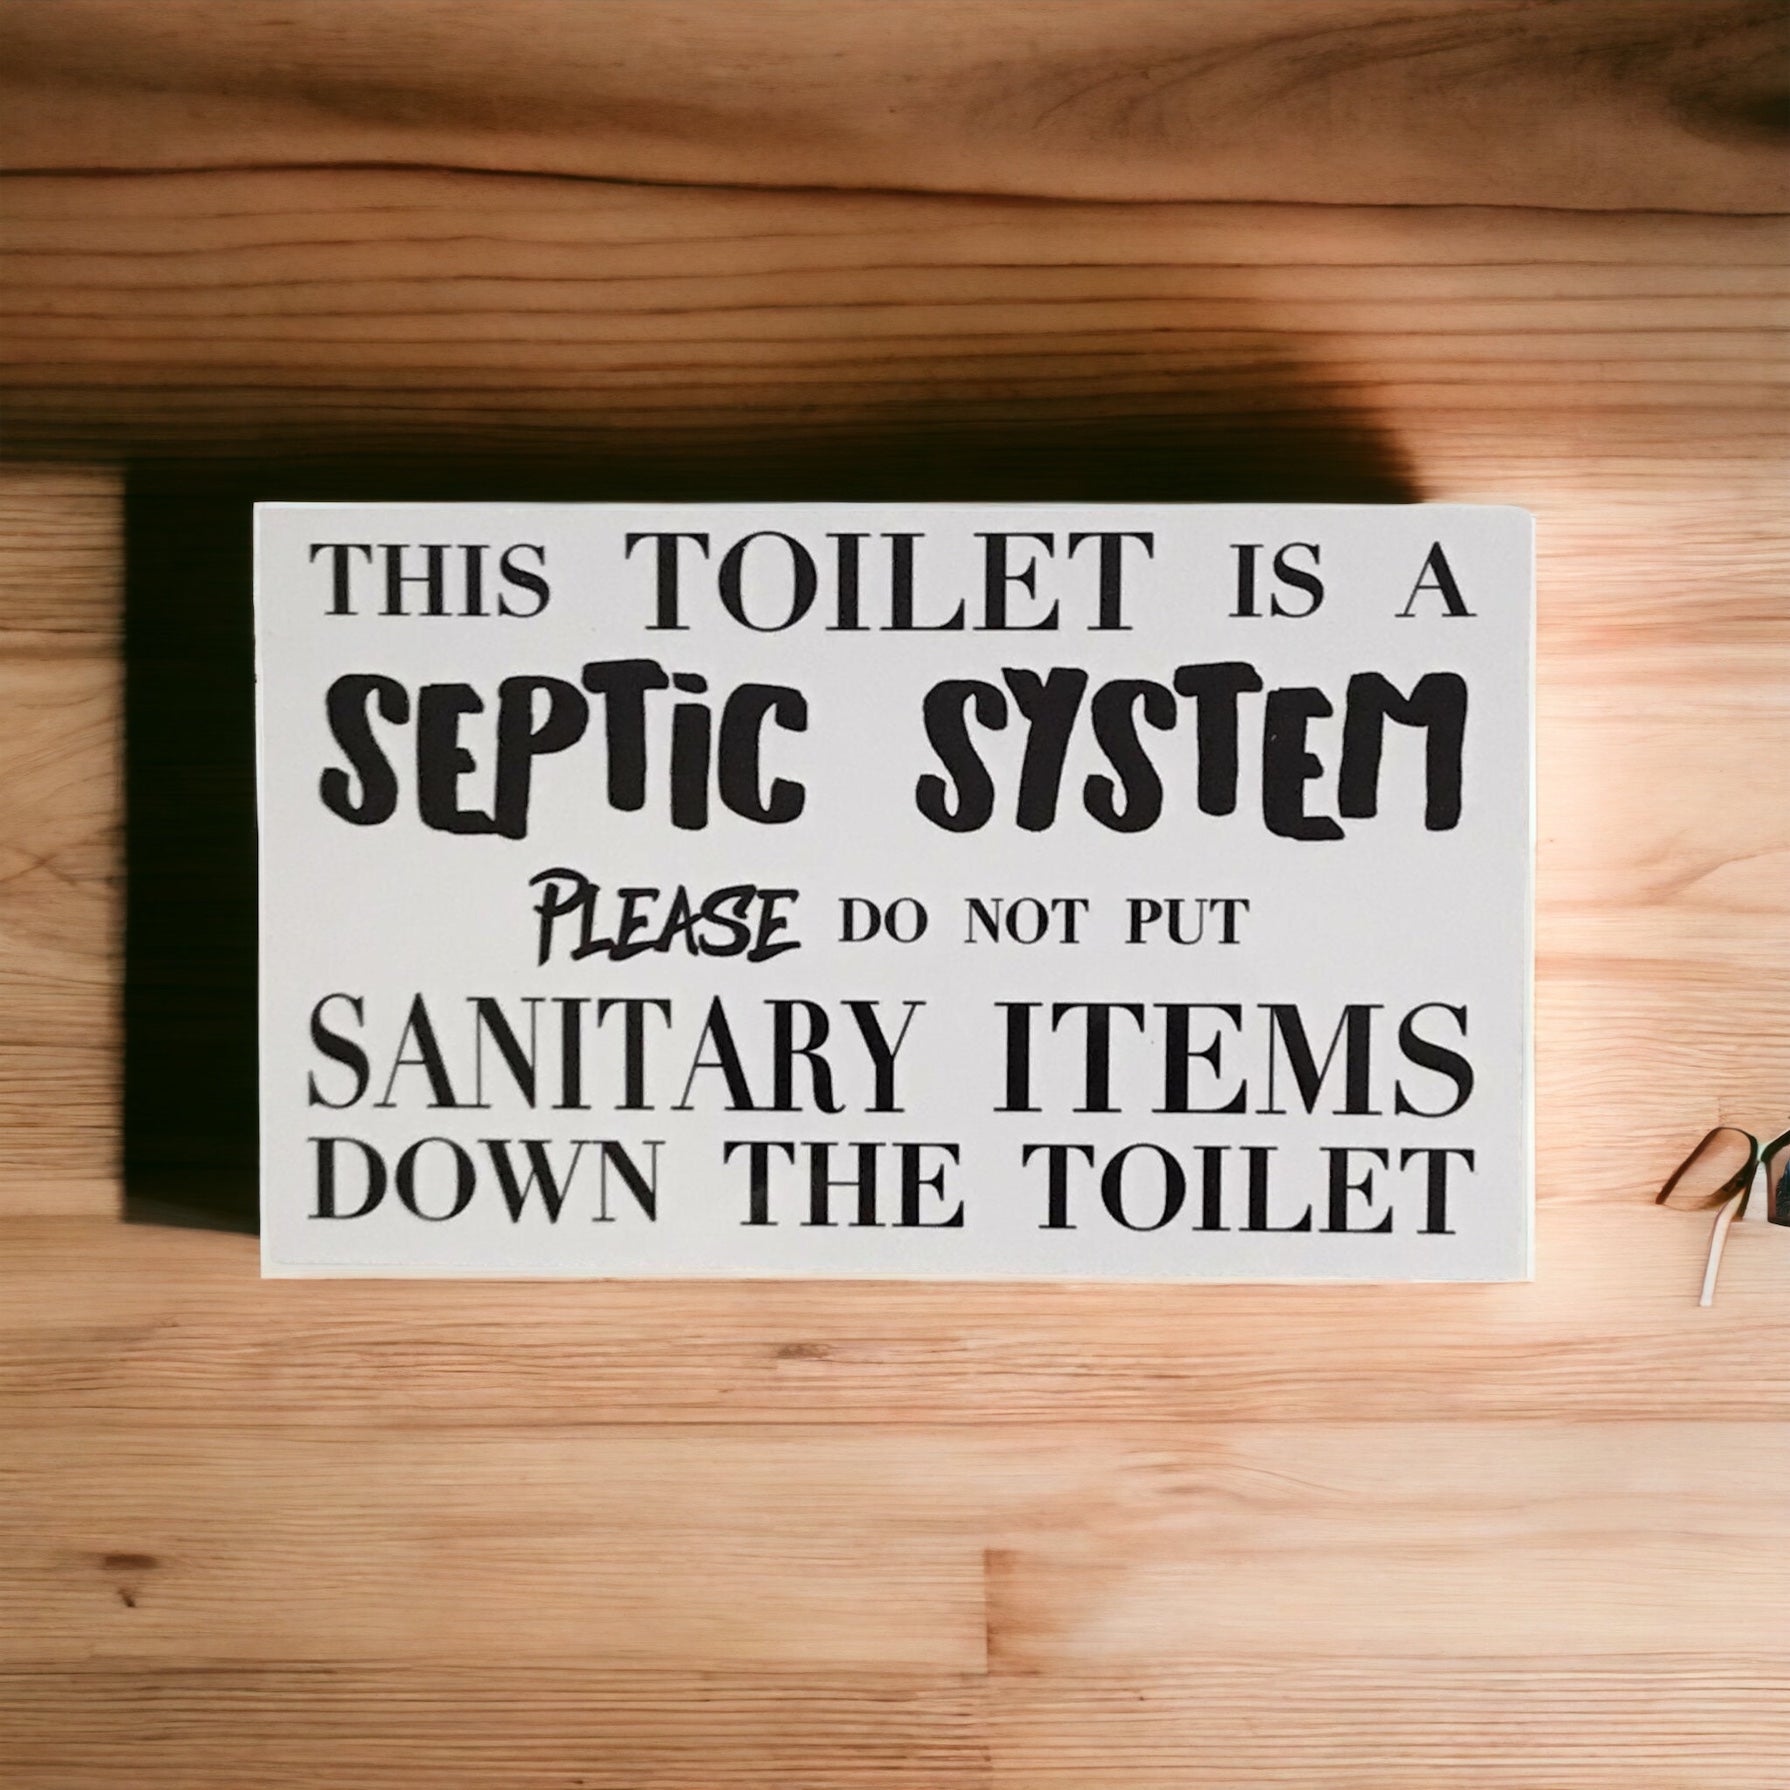 Toilet Septic System Bathroom Modern Sign - The Renmy Store Homewares & Gifts 